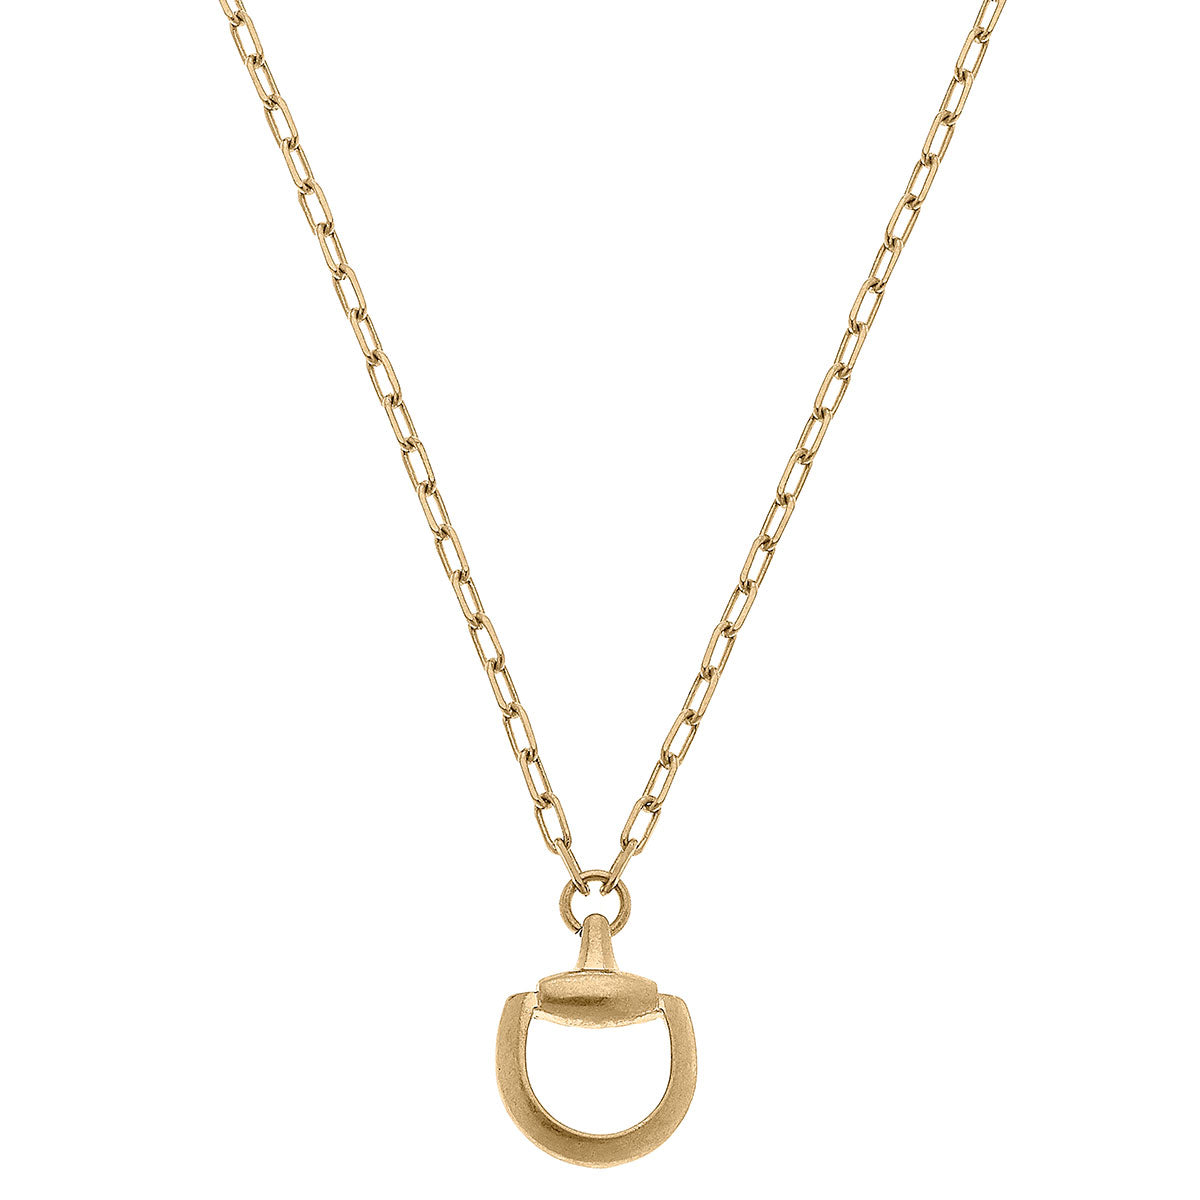 Andie Horsebit Pendant Chain Necklace in Worn Gold by CANVAS